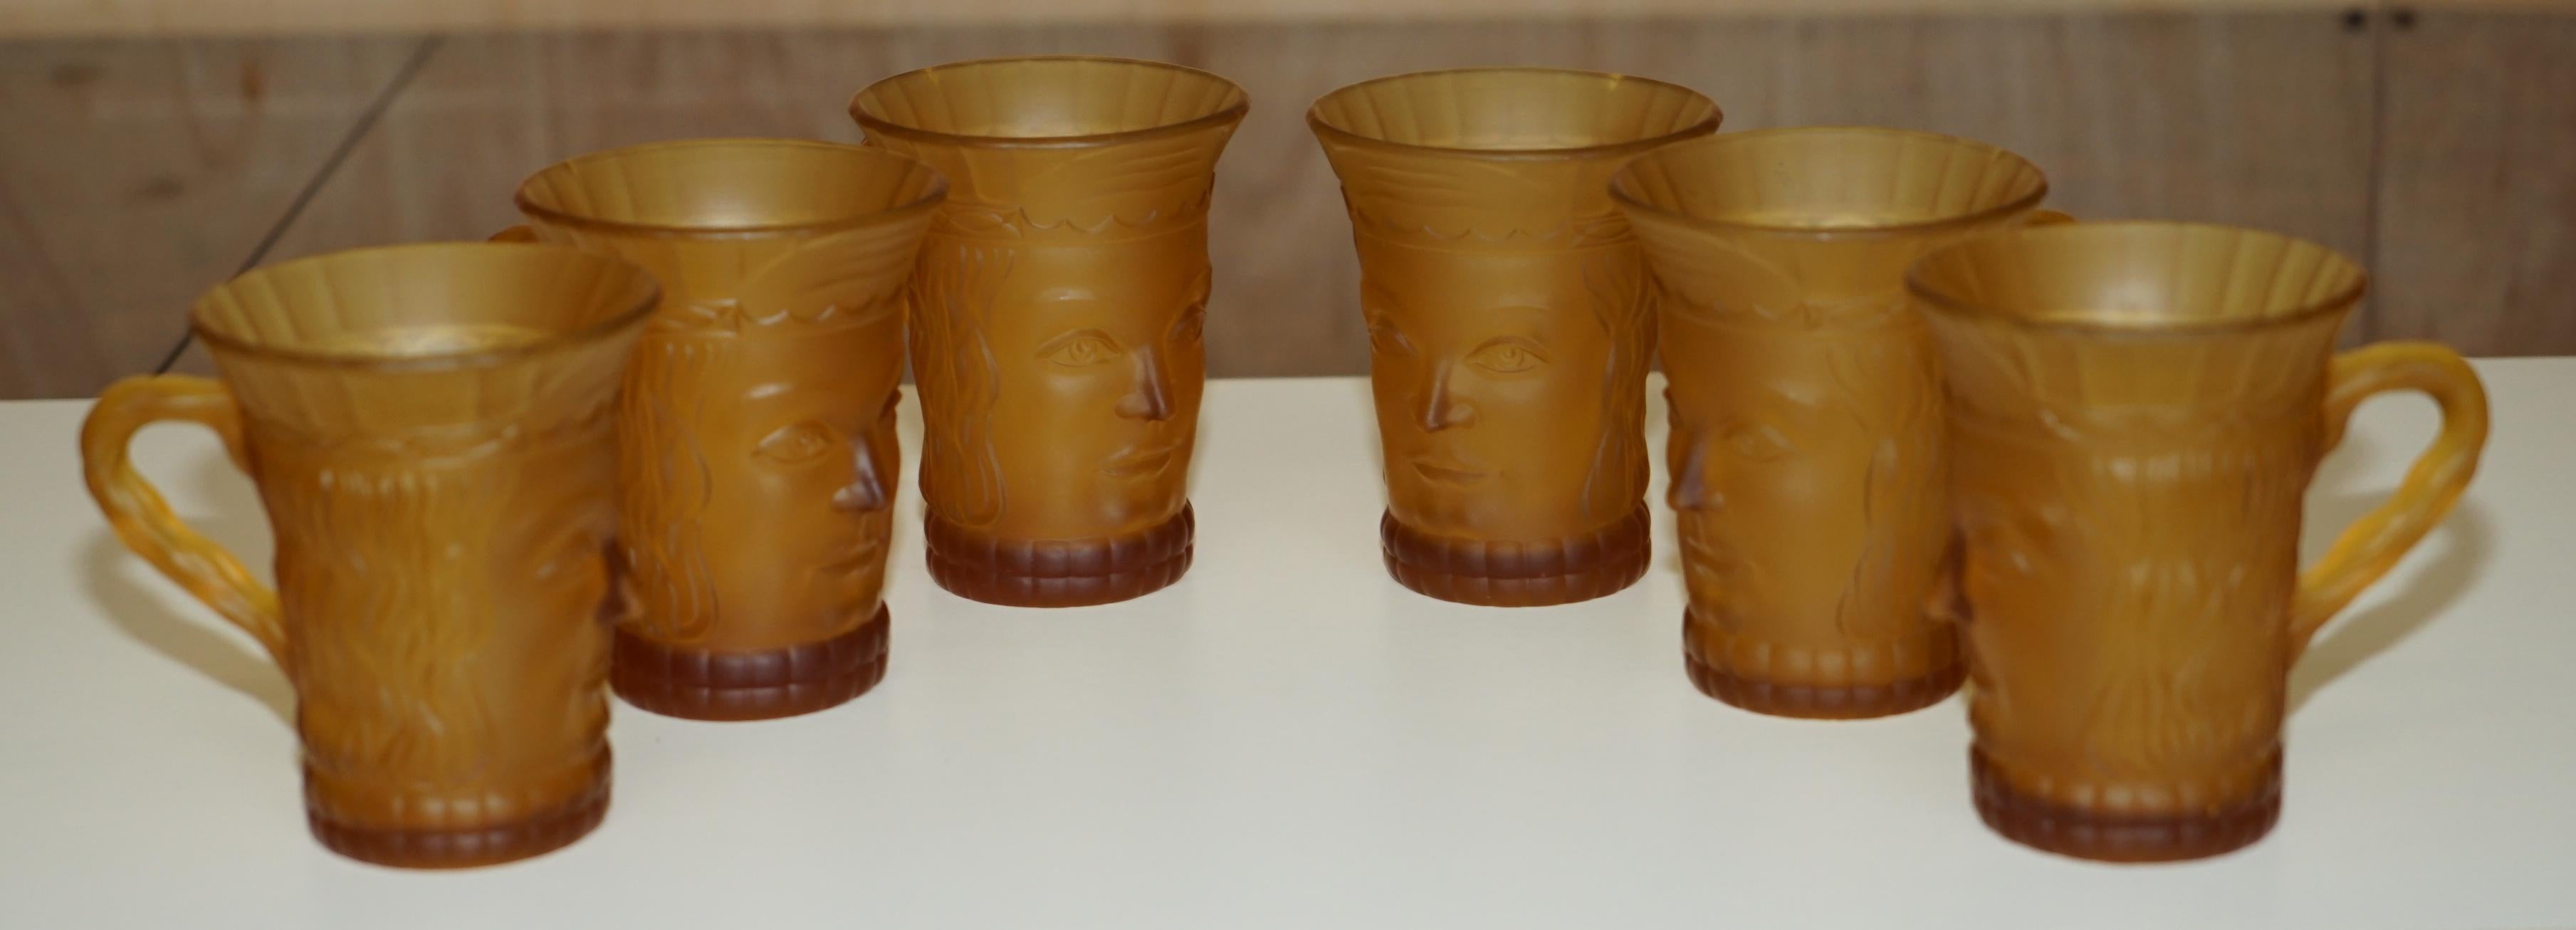 Royal House Antiques

Royal House Antiques is delighted to offer for sale this lovely circa 1920's Amber glass suite of six cups and one larger pitcher jug each depicting a primitive looking face

This is a very well made and decorative suite, I